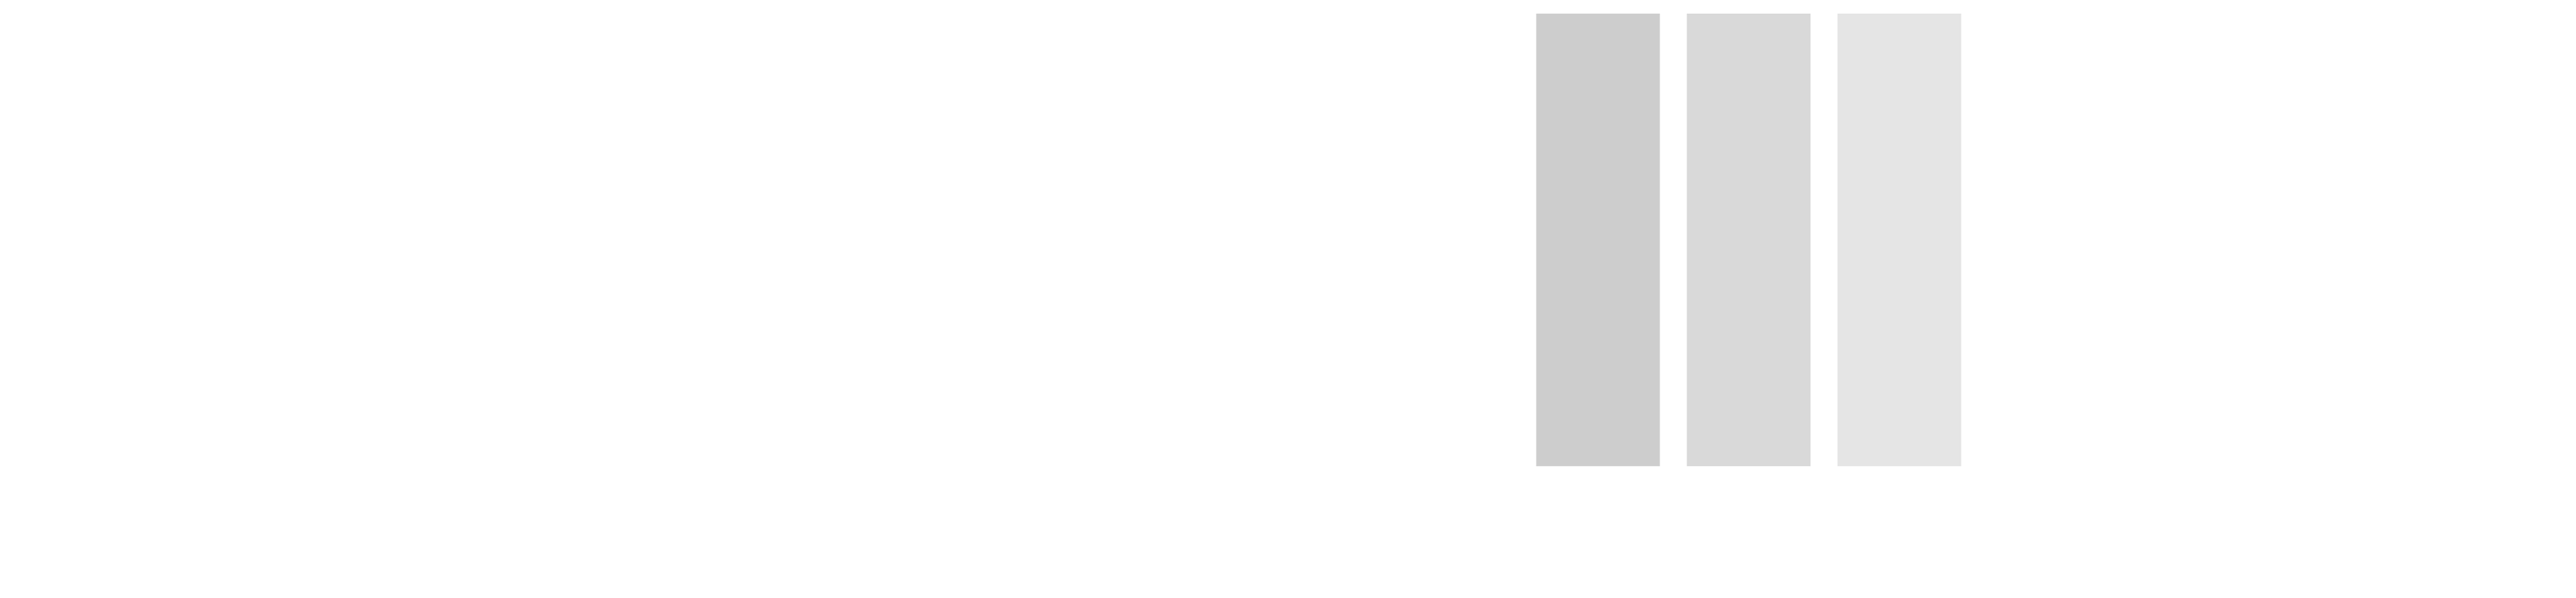 LANGUE (JOURNAL OF LANGUAGE AND EDUCATION)